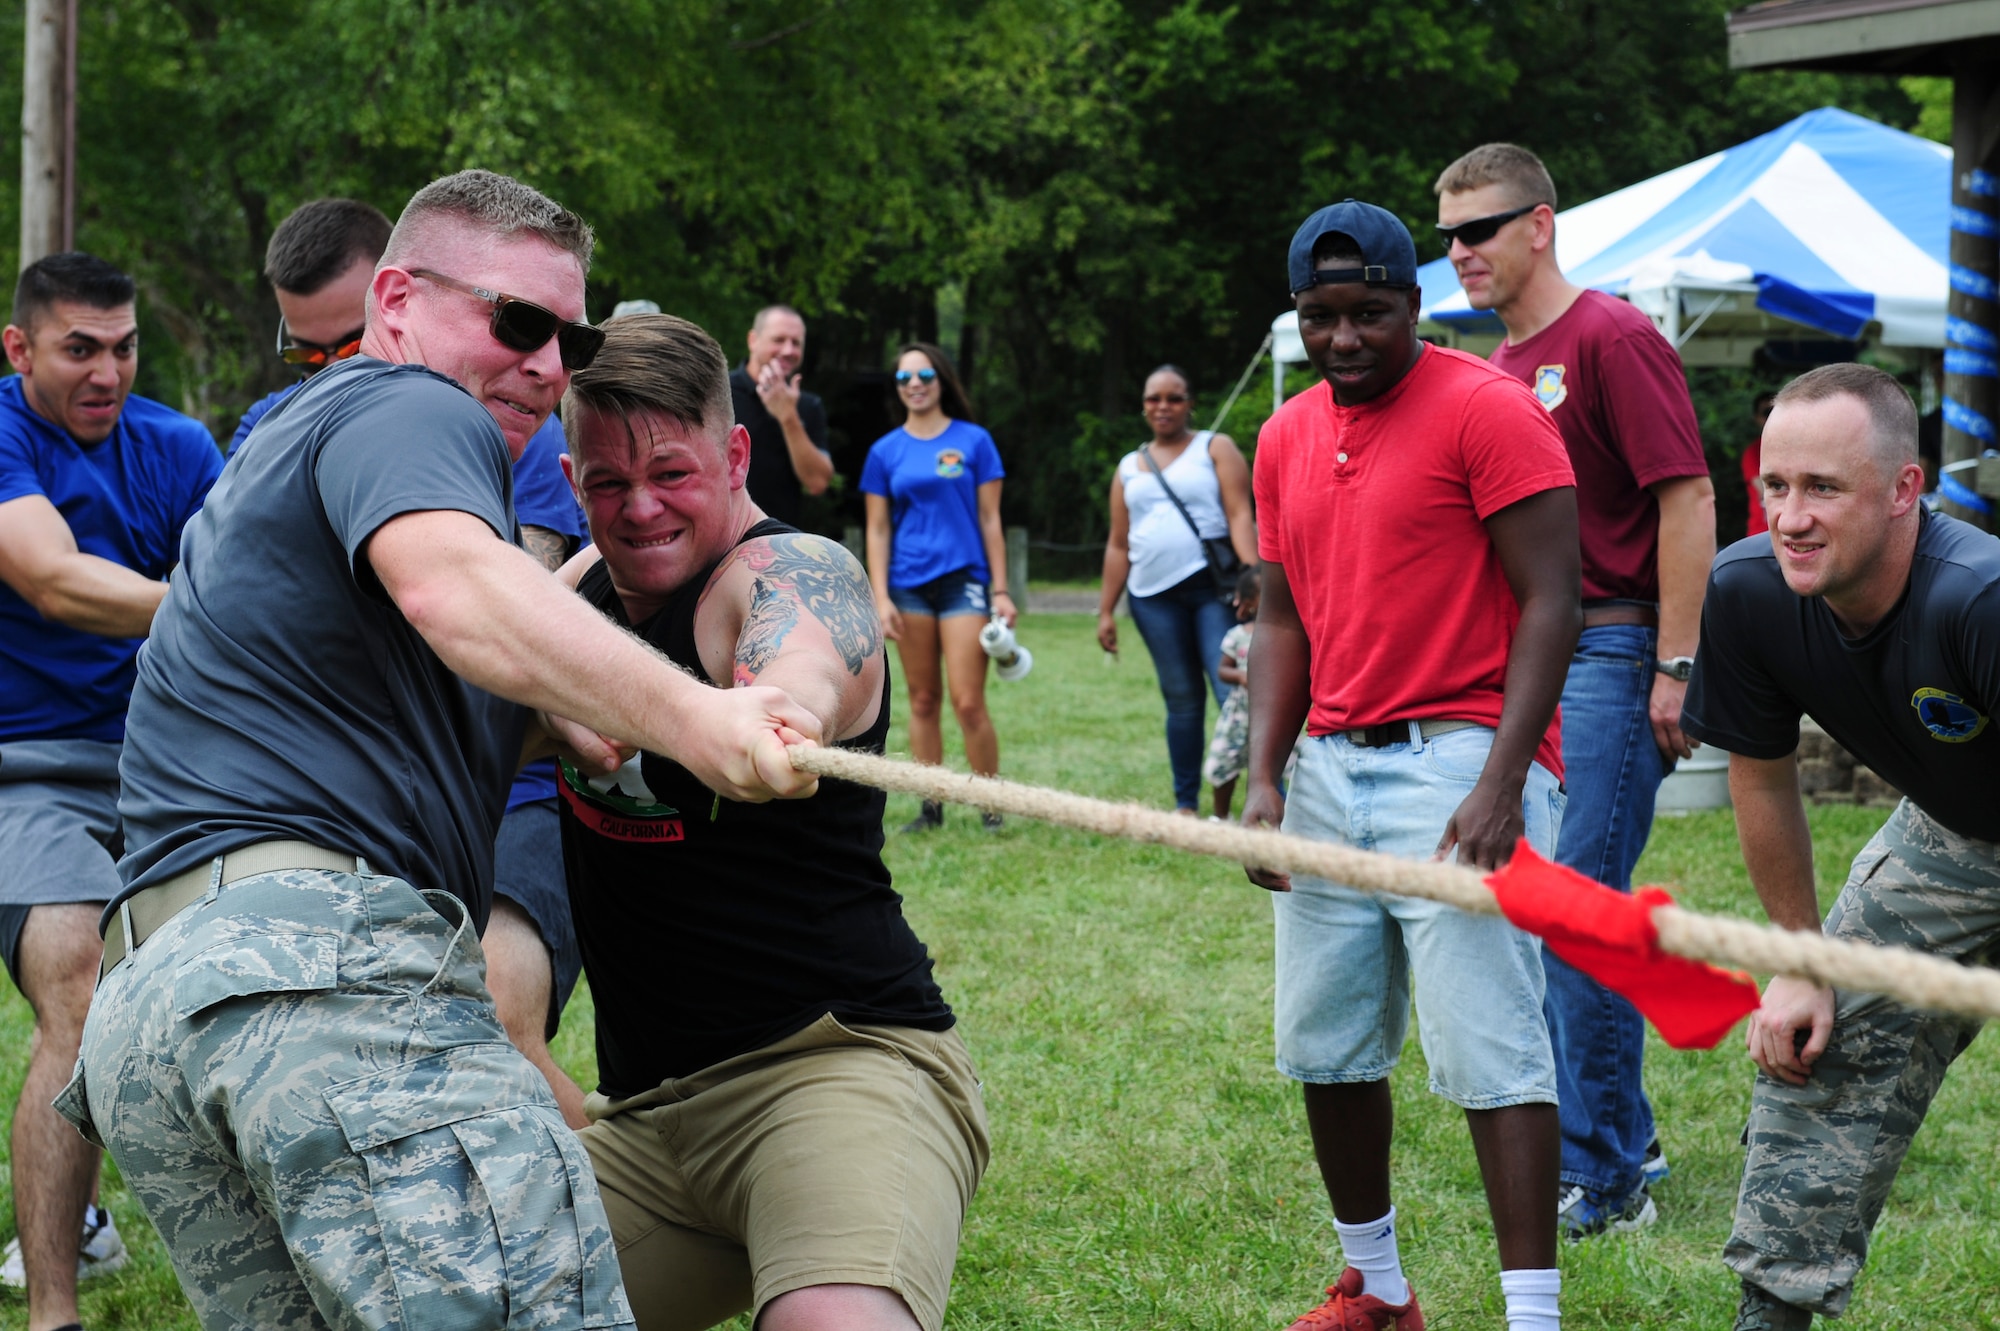 Team members from the Geospatial and Signatures Intelligence Group compete in a Tug-of-War competition during the National Air and Space Intelligence Center’s 50th Oktoberfest on Wright-Patterson Air Force Base, Ohio, Sept. 21, 2018. Members from the Space, Missiles and Forces Intelligence Group were declared the winners of the Oktoberfest Cup. (U.S. Air Force photo by Senior Airman Michael Hunsaker)